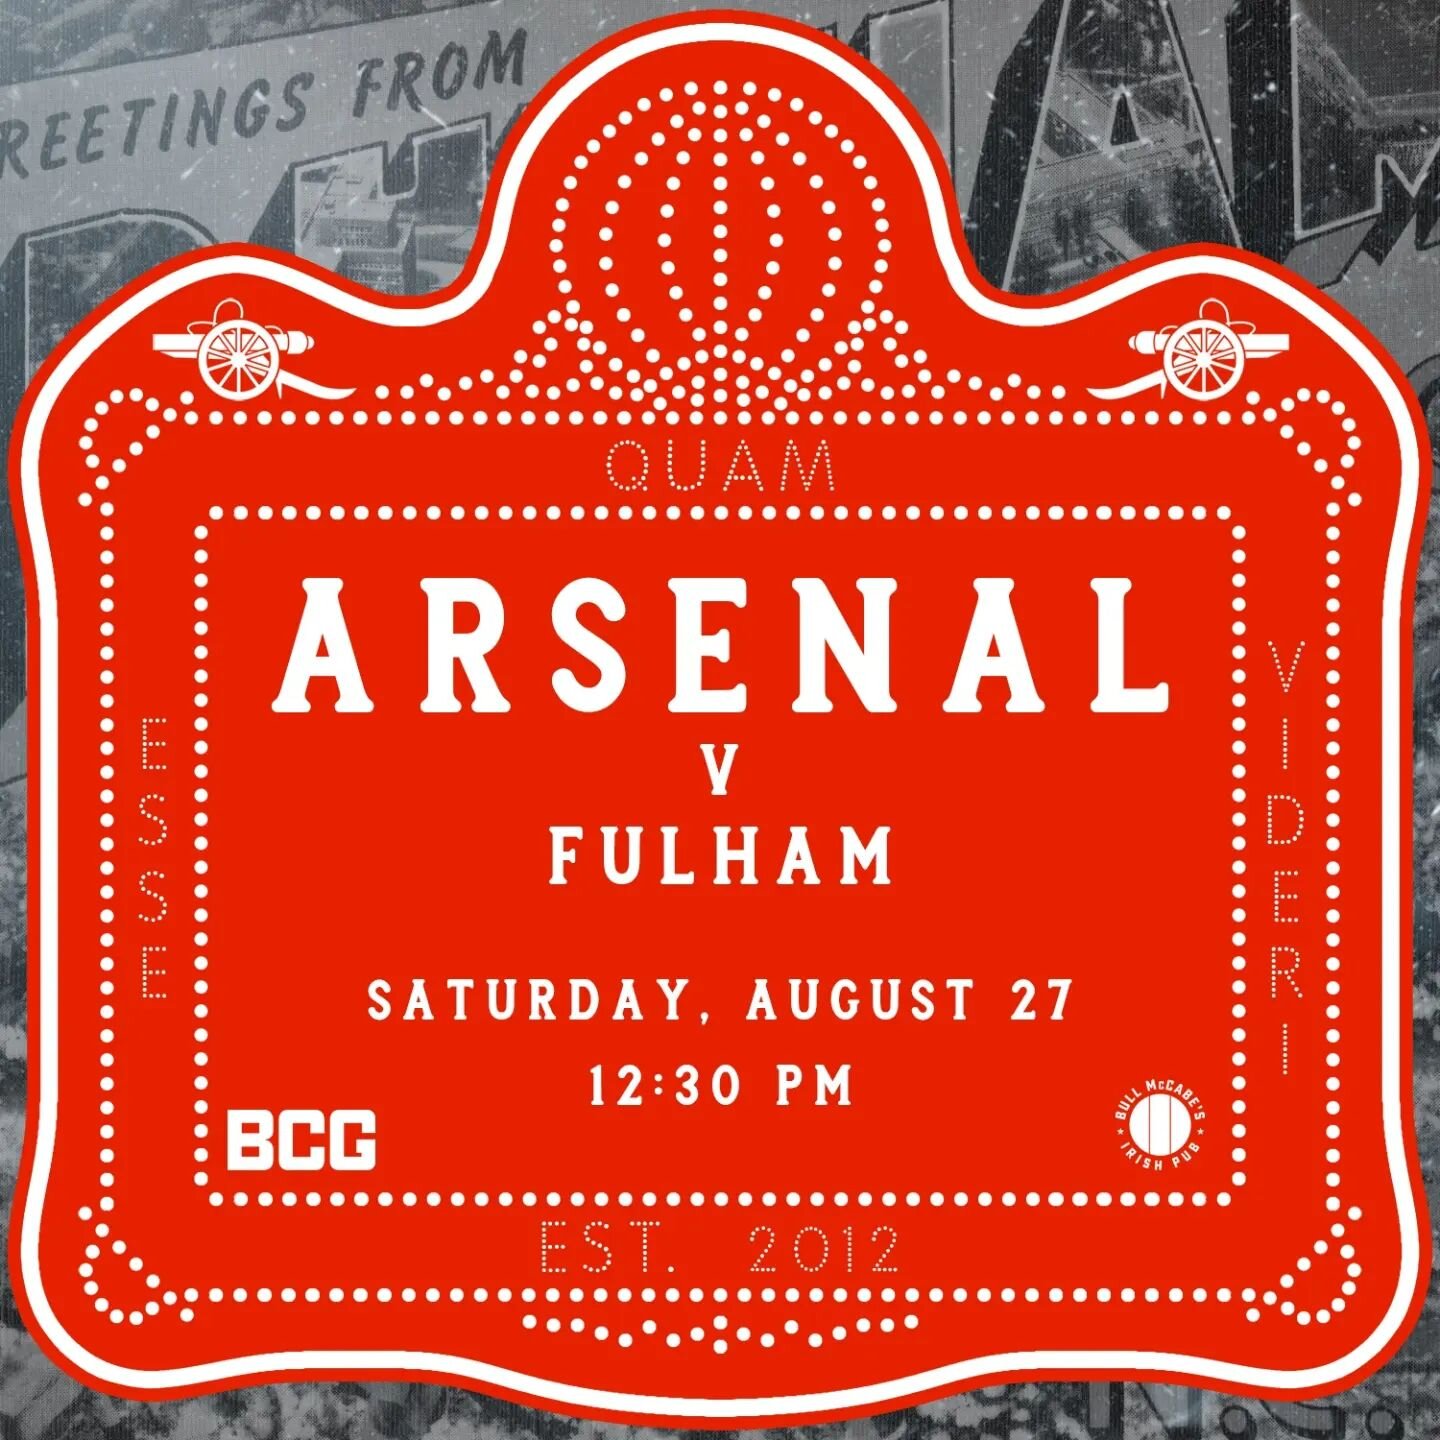 We're back for a home matchup with Fulham this Saturday, come on by @bullmccabesdnc and see stop #4 on our soon to be 38-0-0 season🤞!🔴⚪️